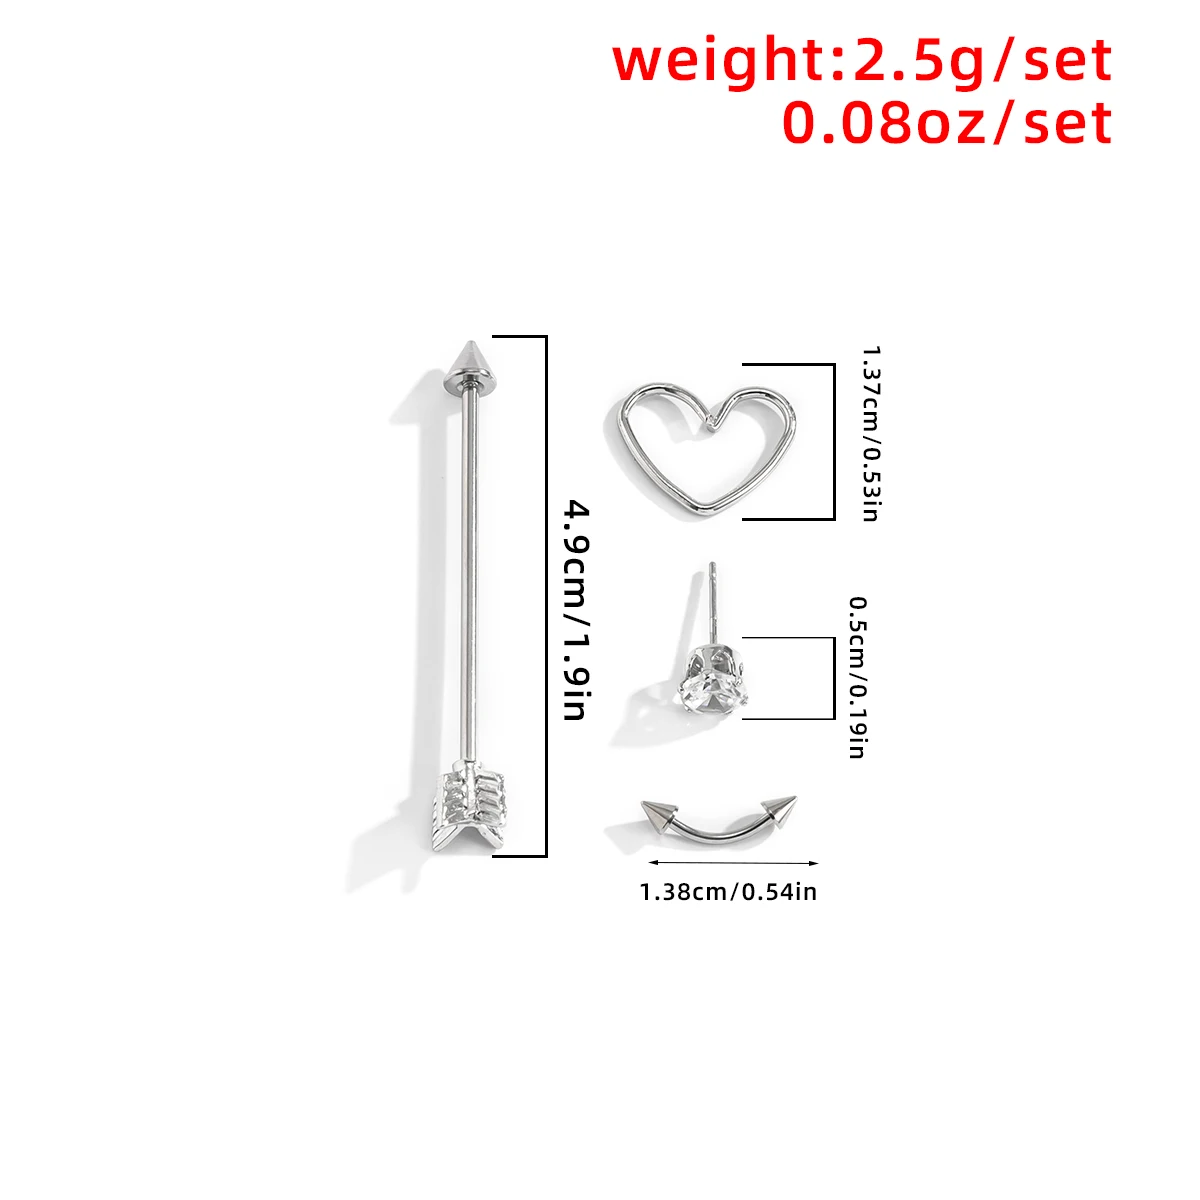 

2021 New Silver Color Stainless Steel Eyebrow Navel Belly Lip Tongue Nose Piercing Bar Ring Labret Barbell Tunnel Body Jewelry